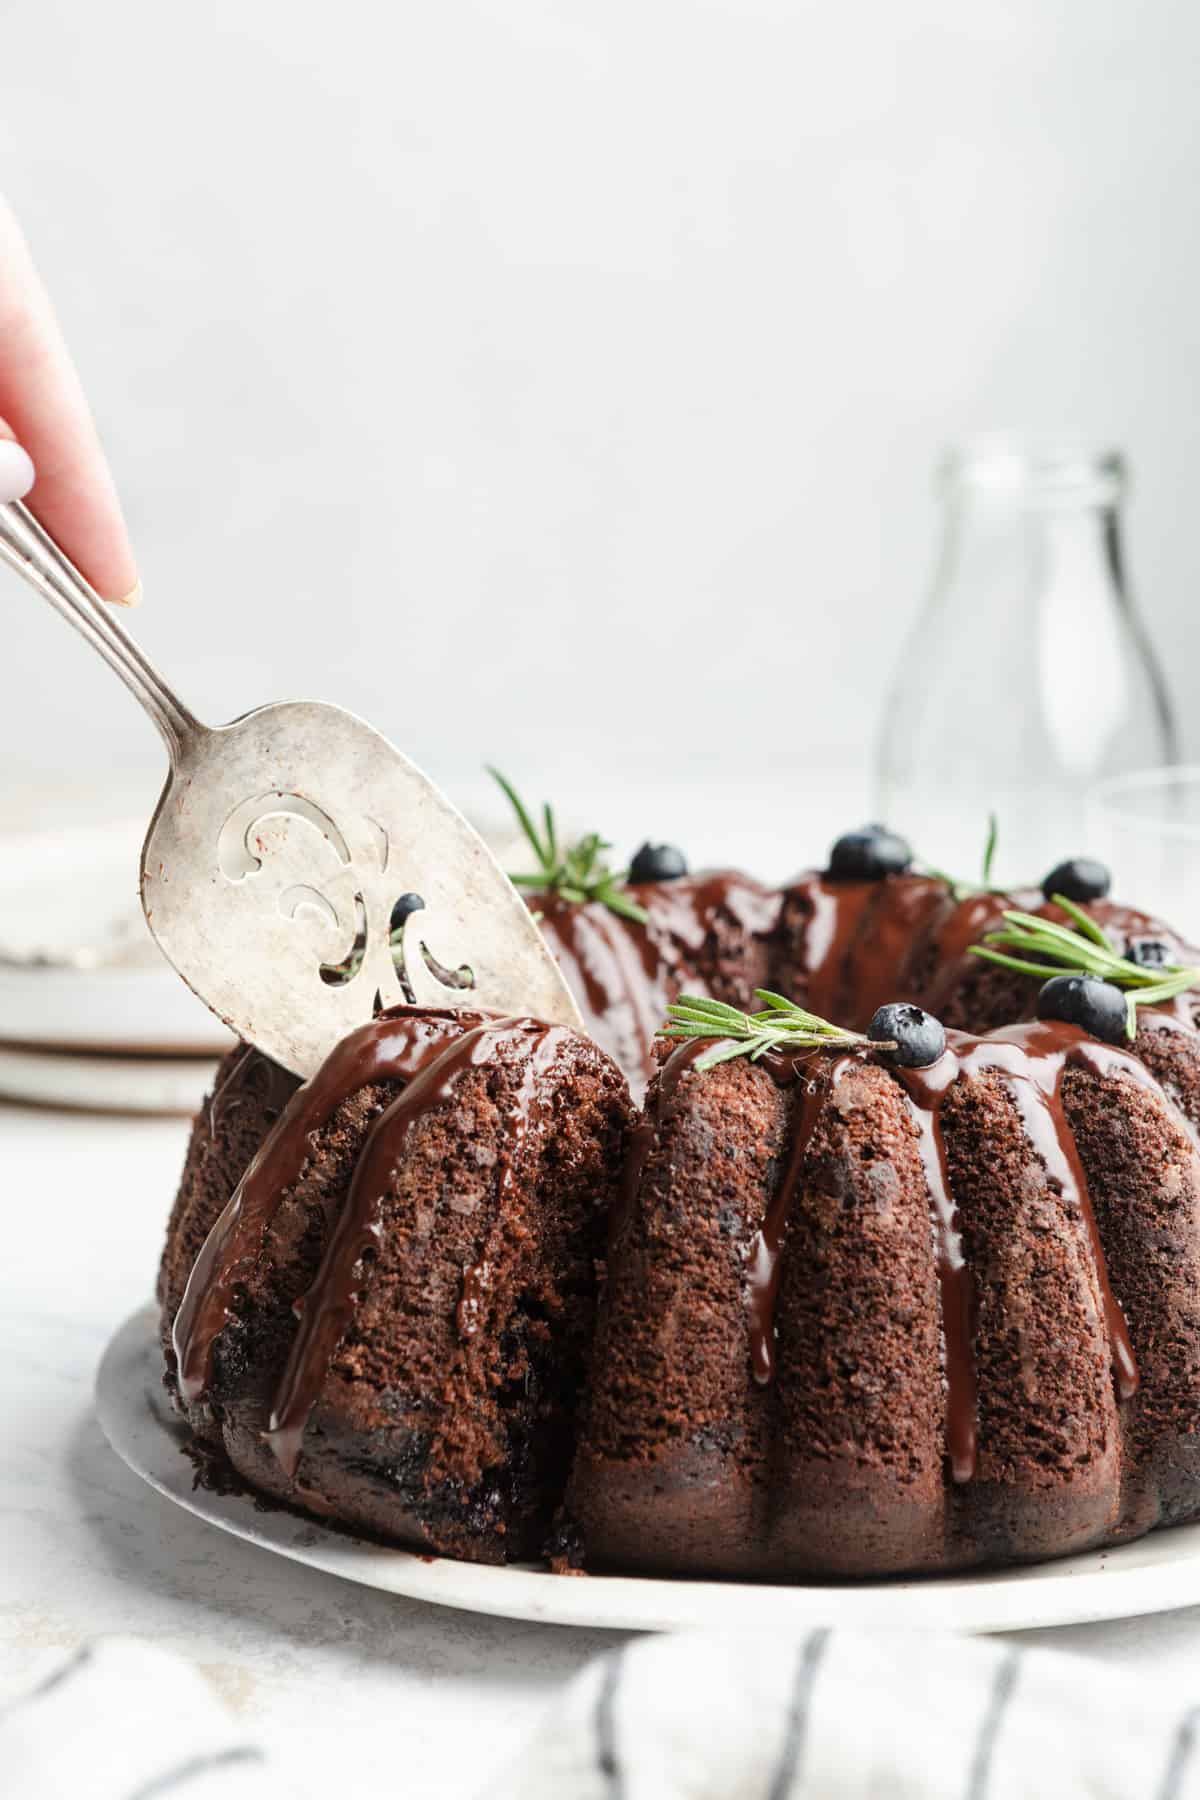 Slicing a chocolate bundt cake topped with blueberries and rosemary with a cake server.